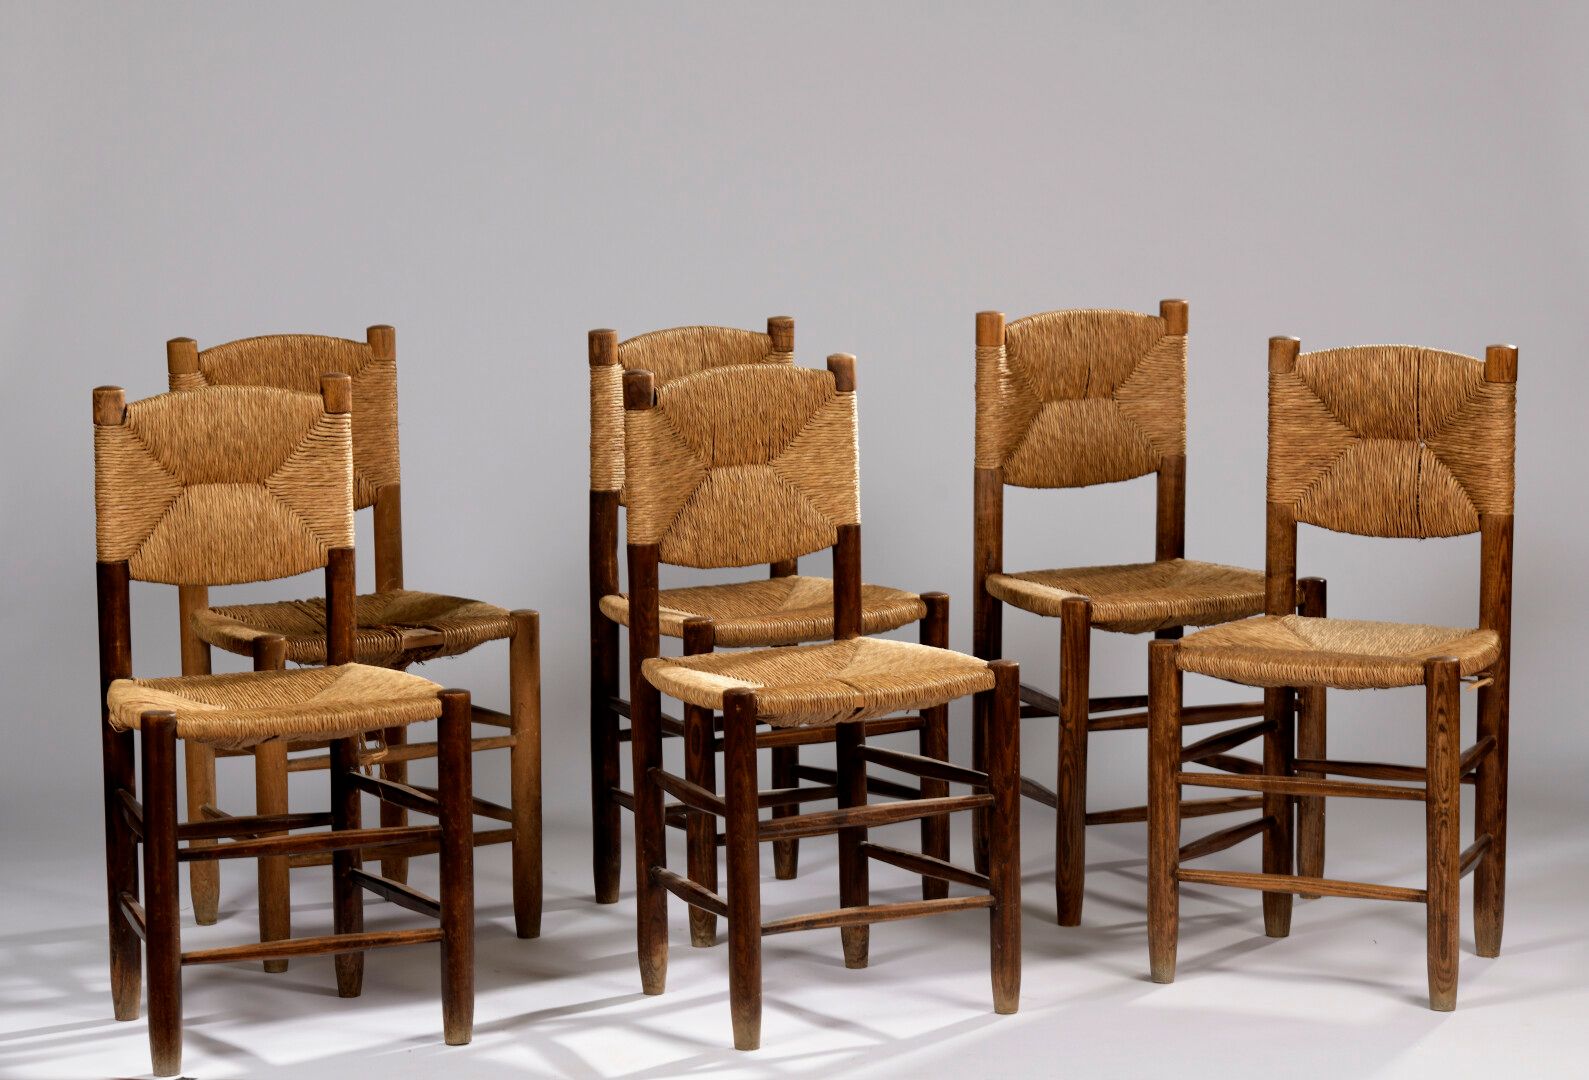 Null Charlotte PERRIAND (1903-1999)

Suite of six chairs called "Bauche" with st&hellip;